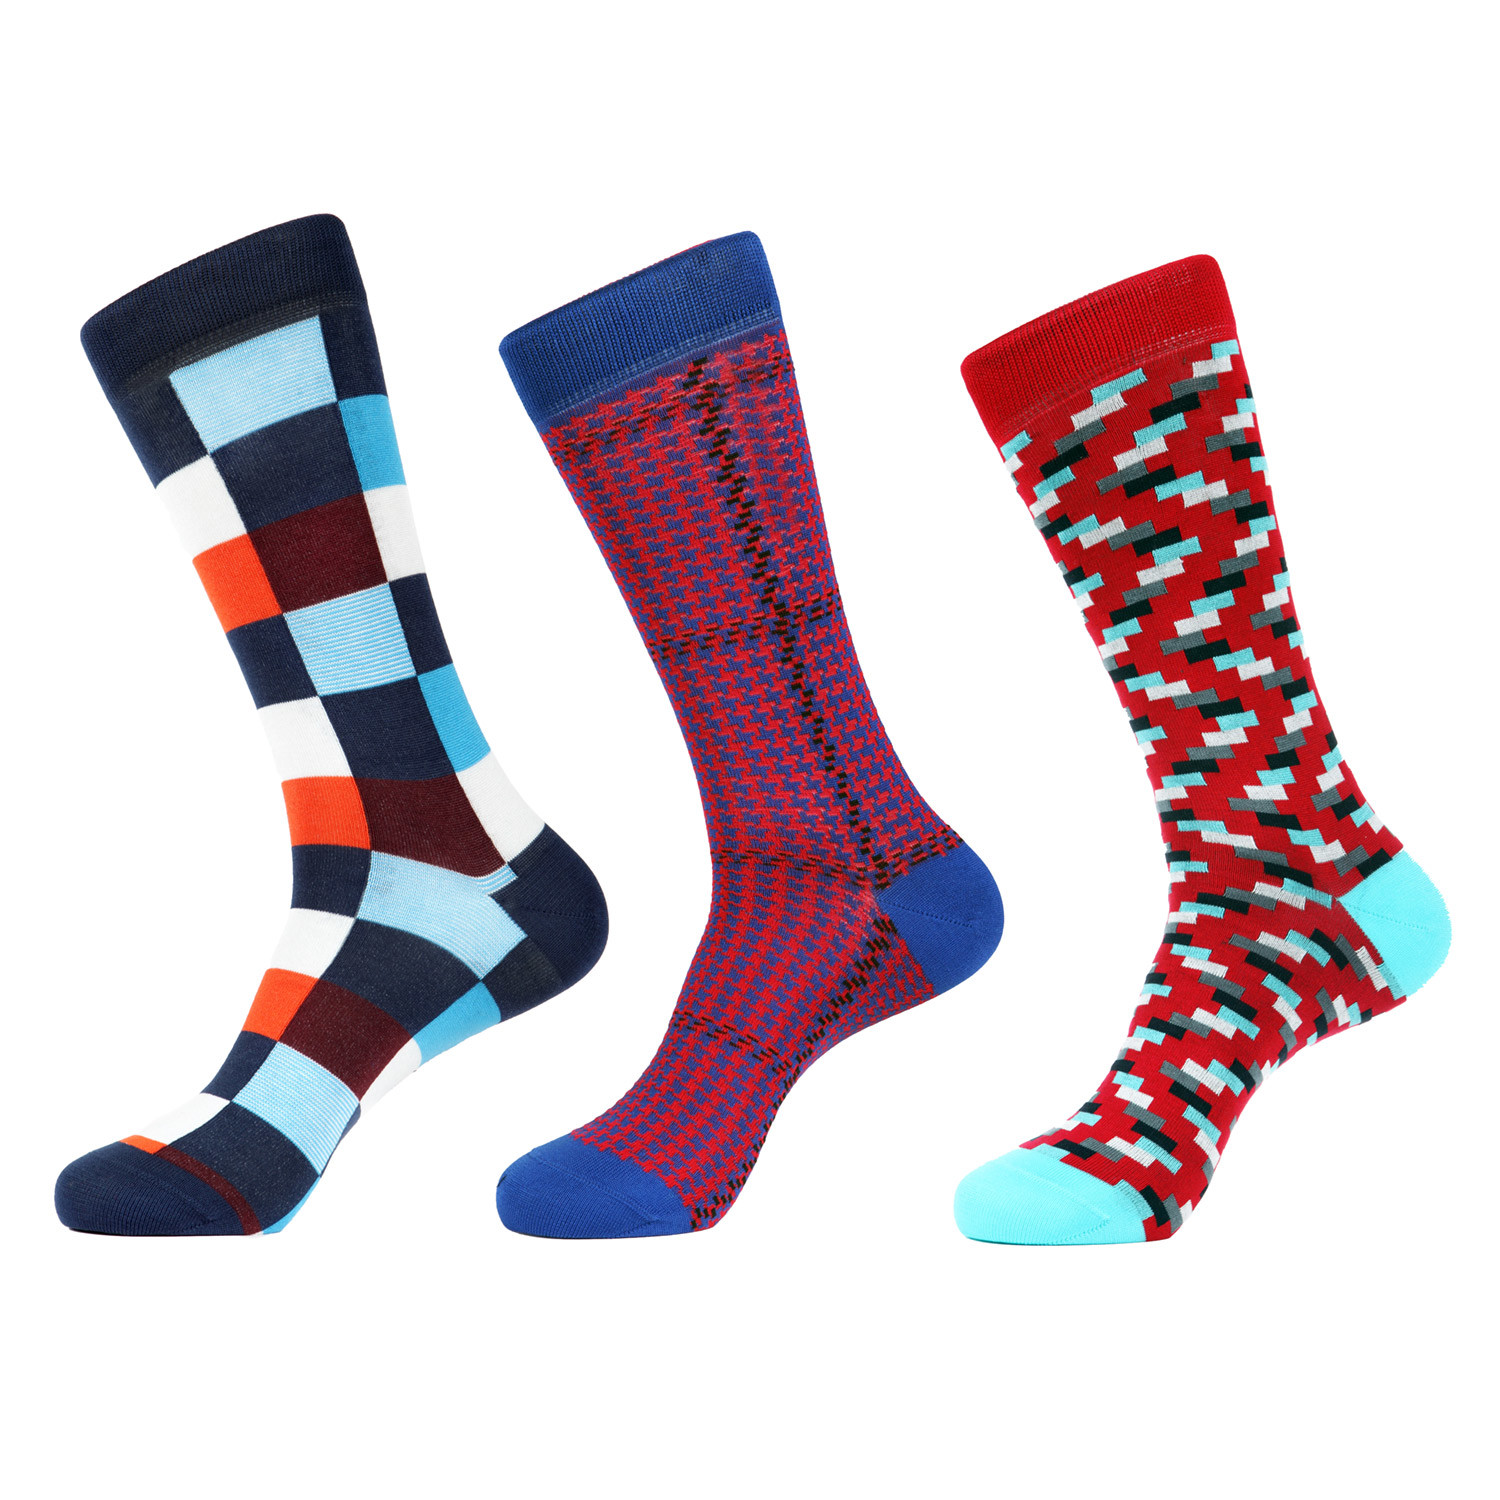 Knight Mid-Calf Sock // Pack of 3 - Jared Lang Socks - Touch of Modern